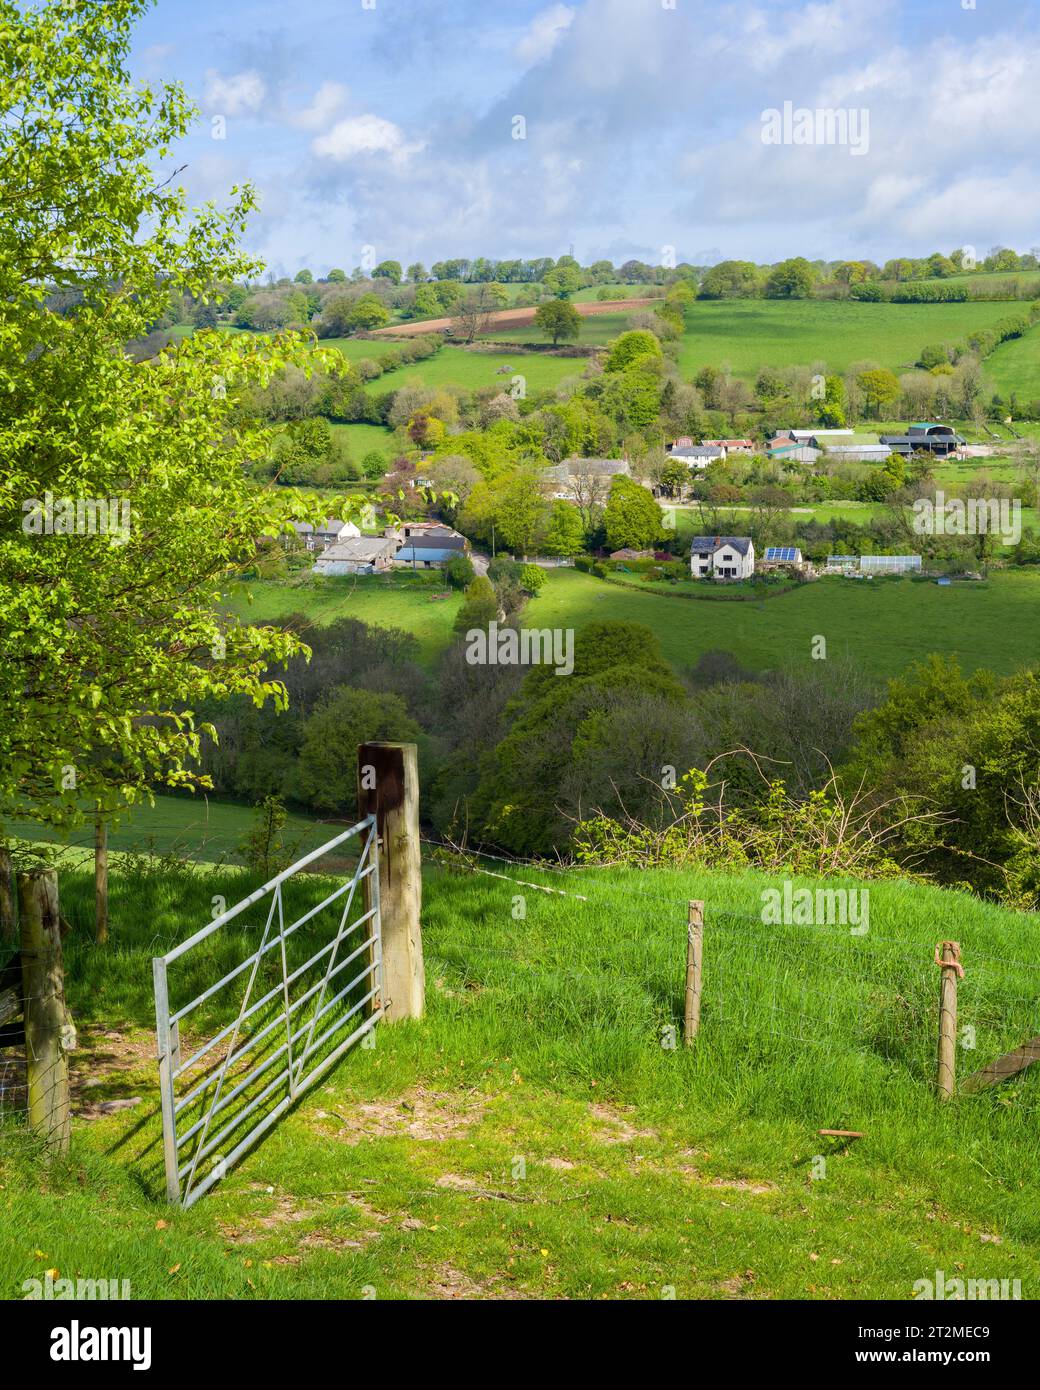 Higher, Middle und Lower Brown Farms nahe Clatworthy in den Brendon Hills, Somerset, England. Stockfoto